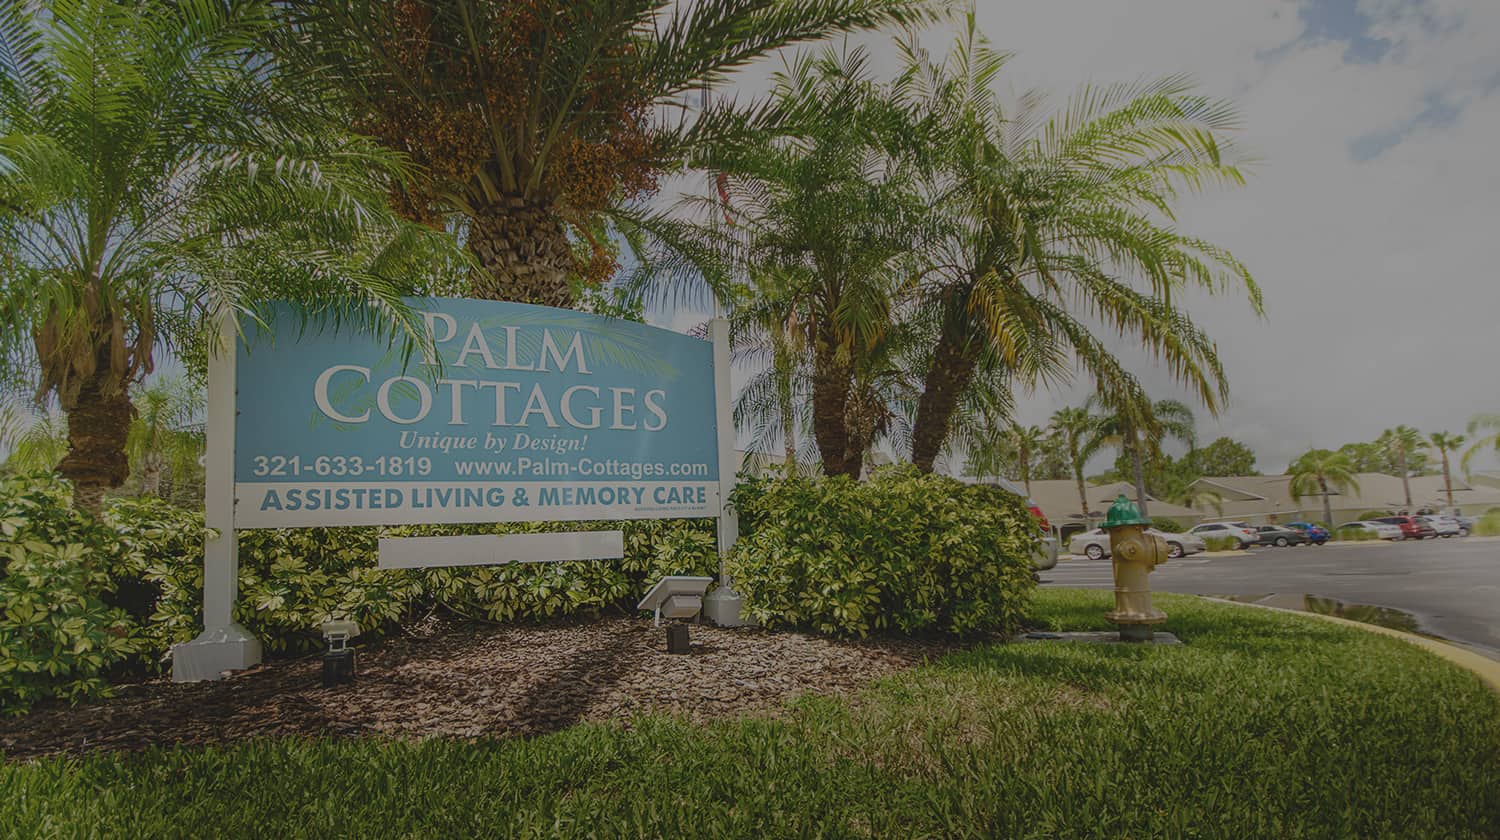 Palm Cottage assisted living facility exterior with sign